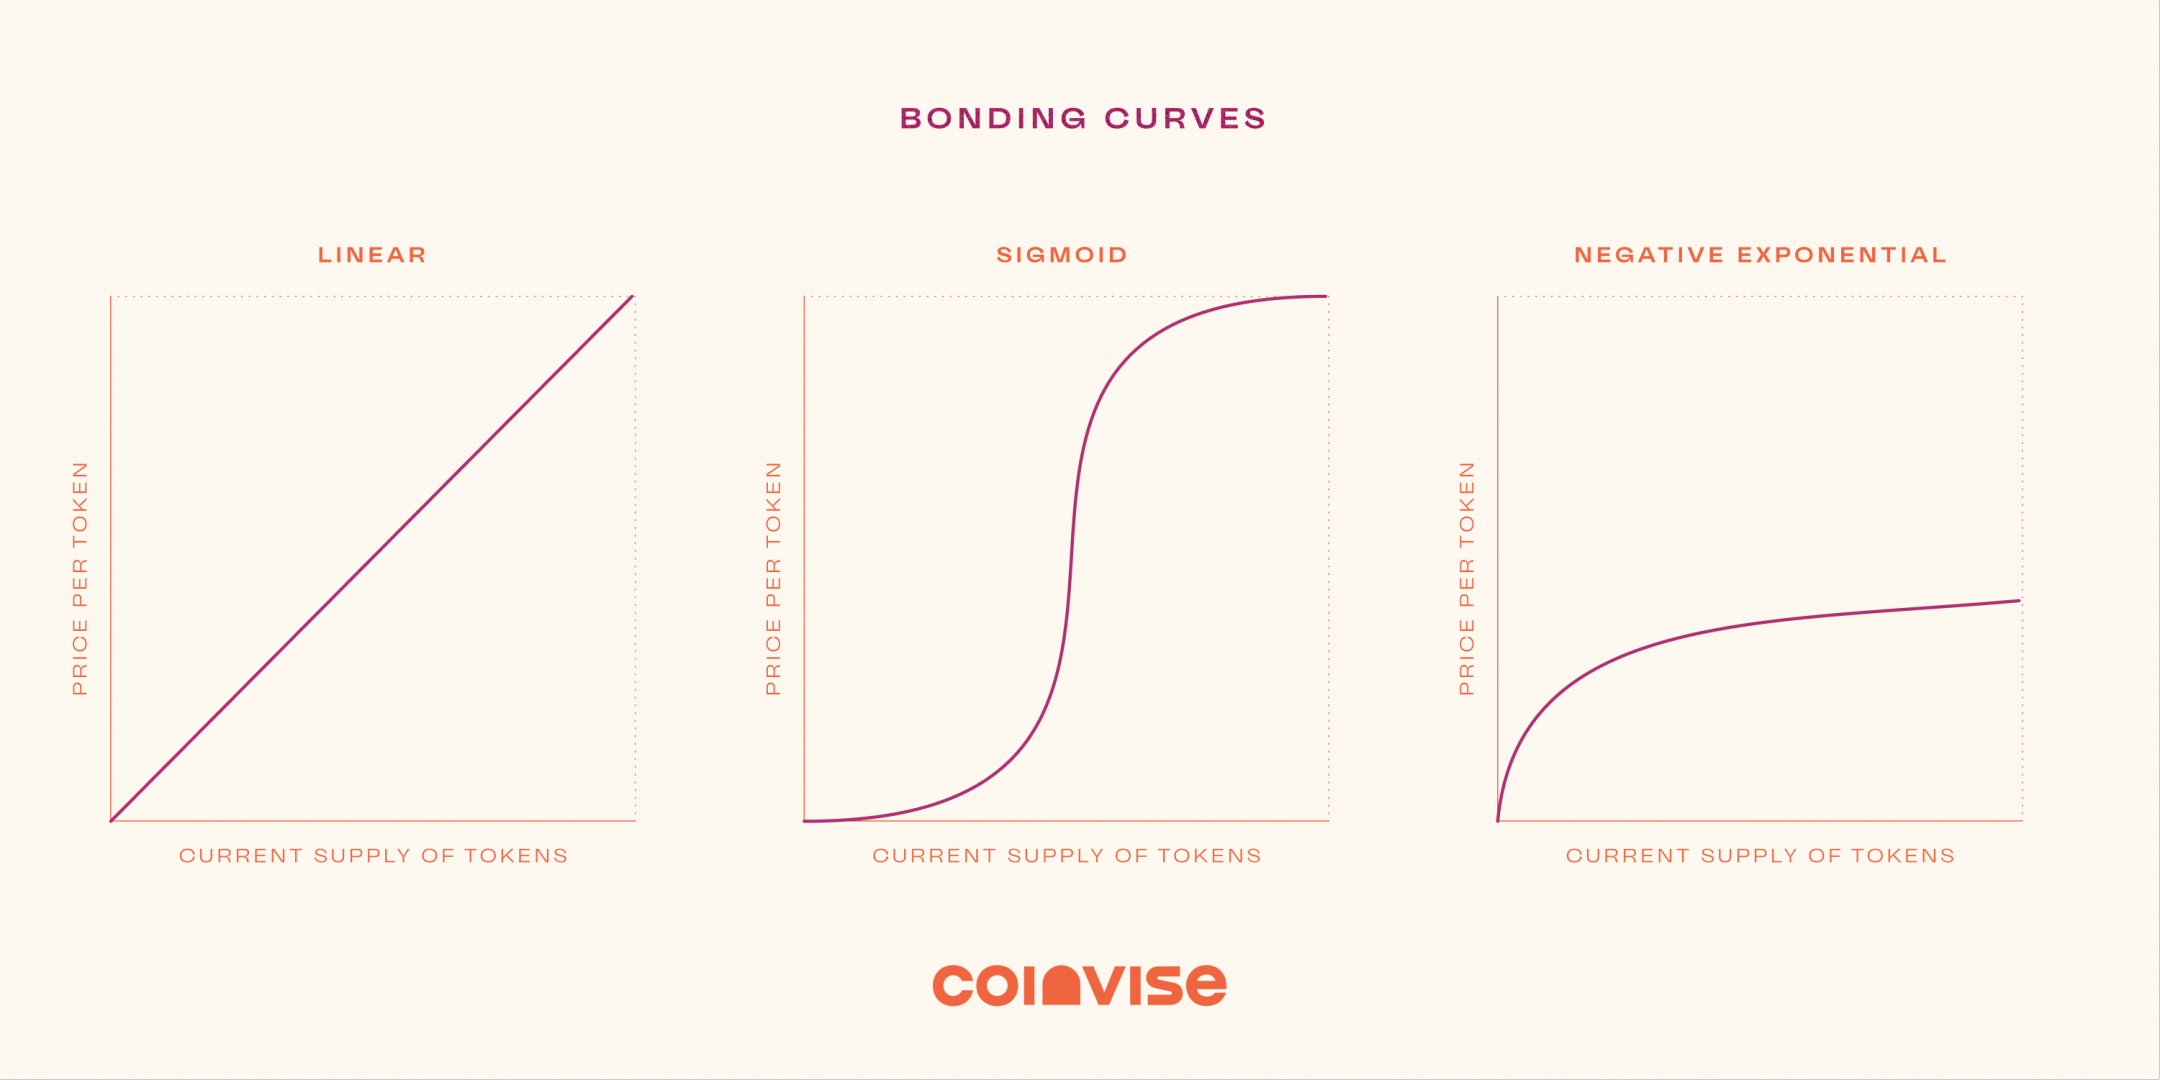 Three types of bonding curves: Linear, Sigmoid, and Negative Exponential Curve